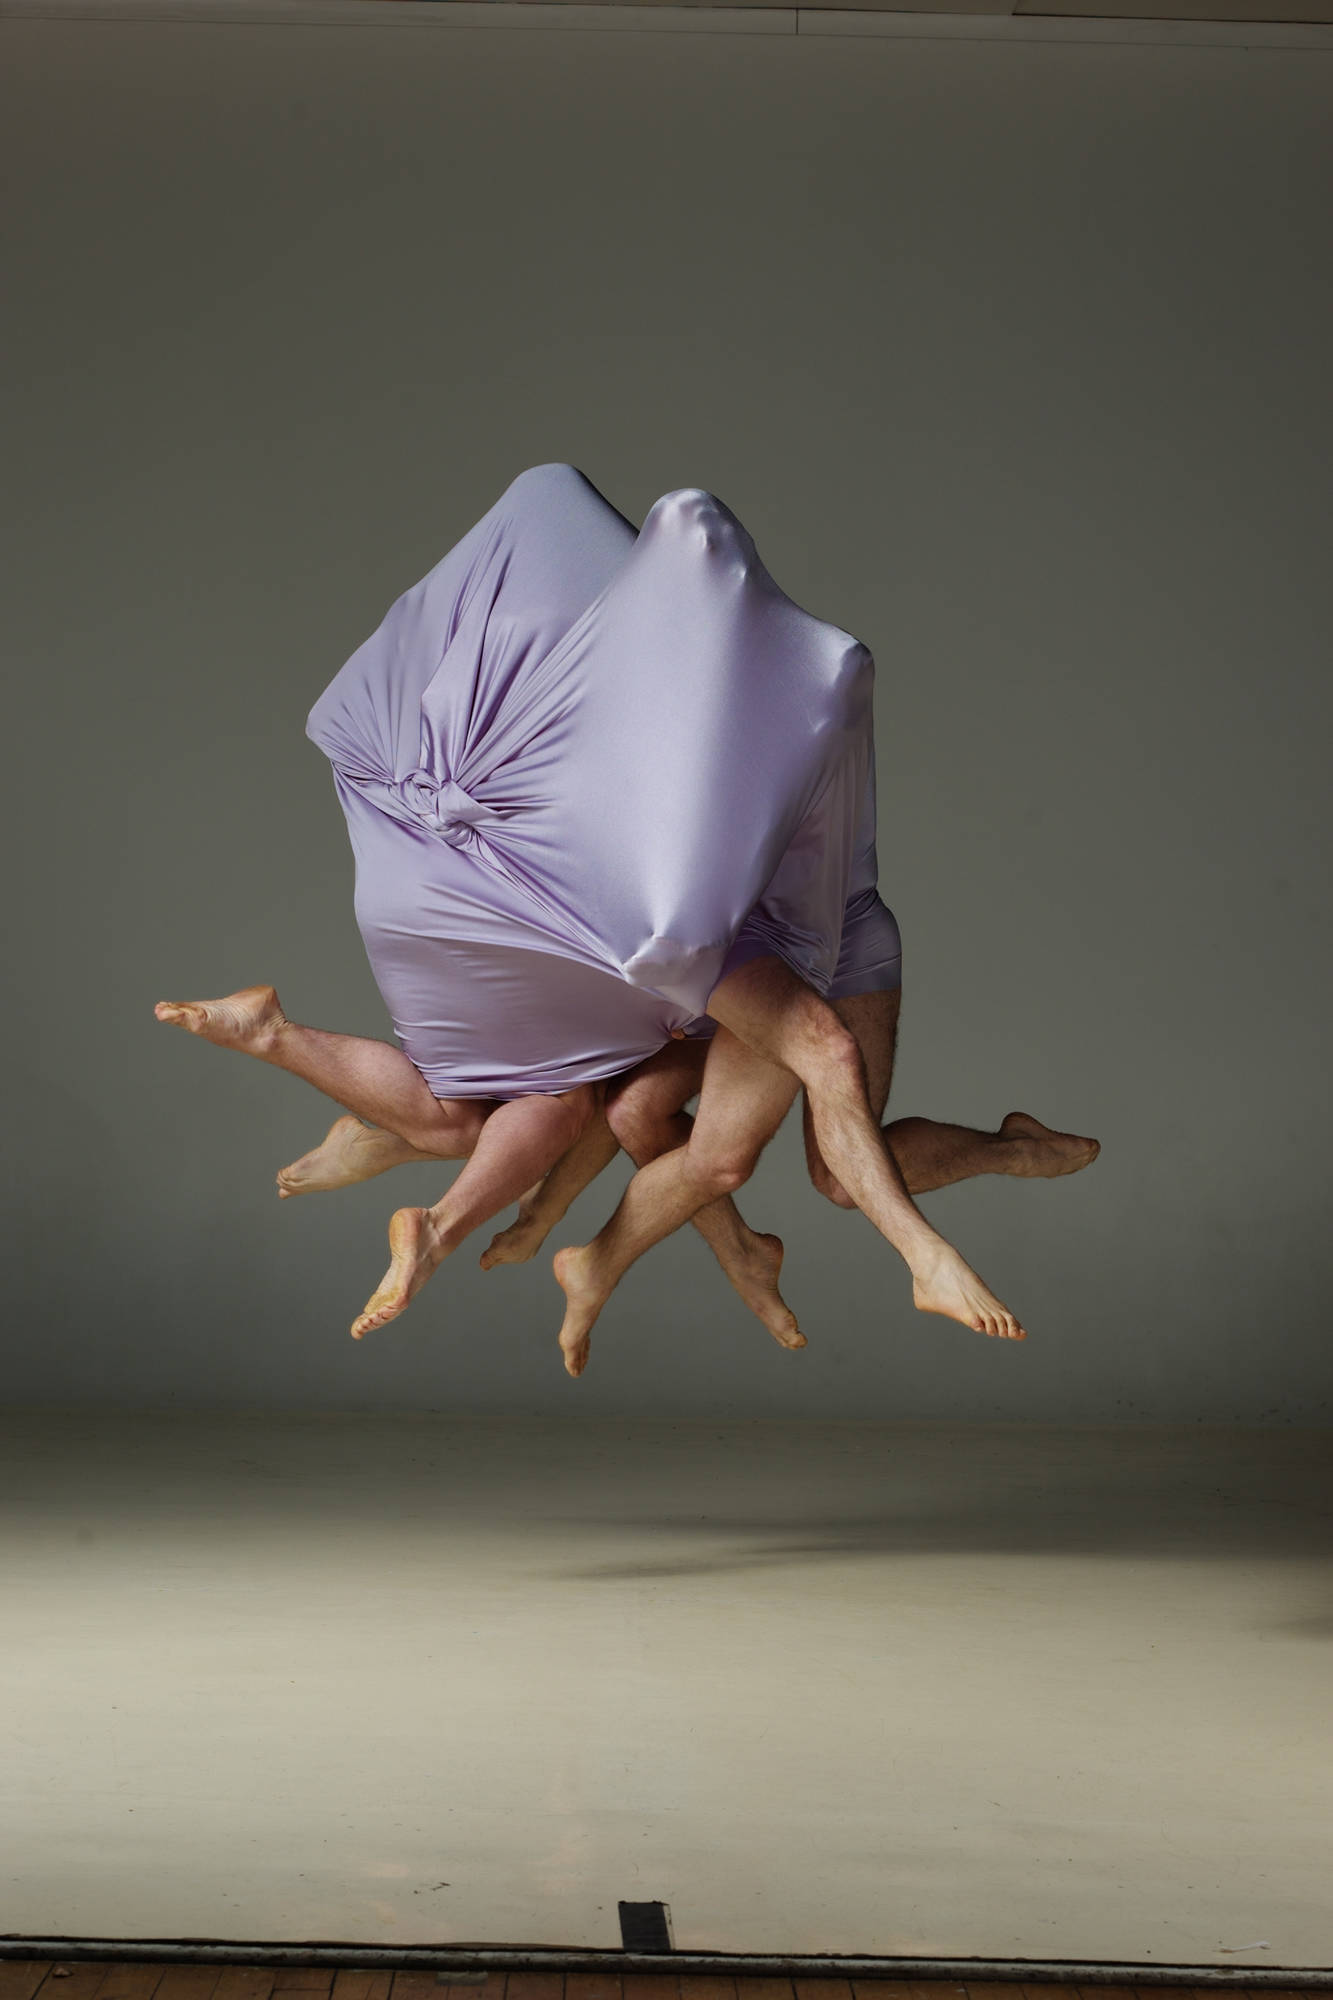 Members of BodyVox perform a piece, Squid, in an undated photo. (Photo by Lois Greenfield)